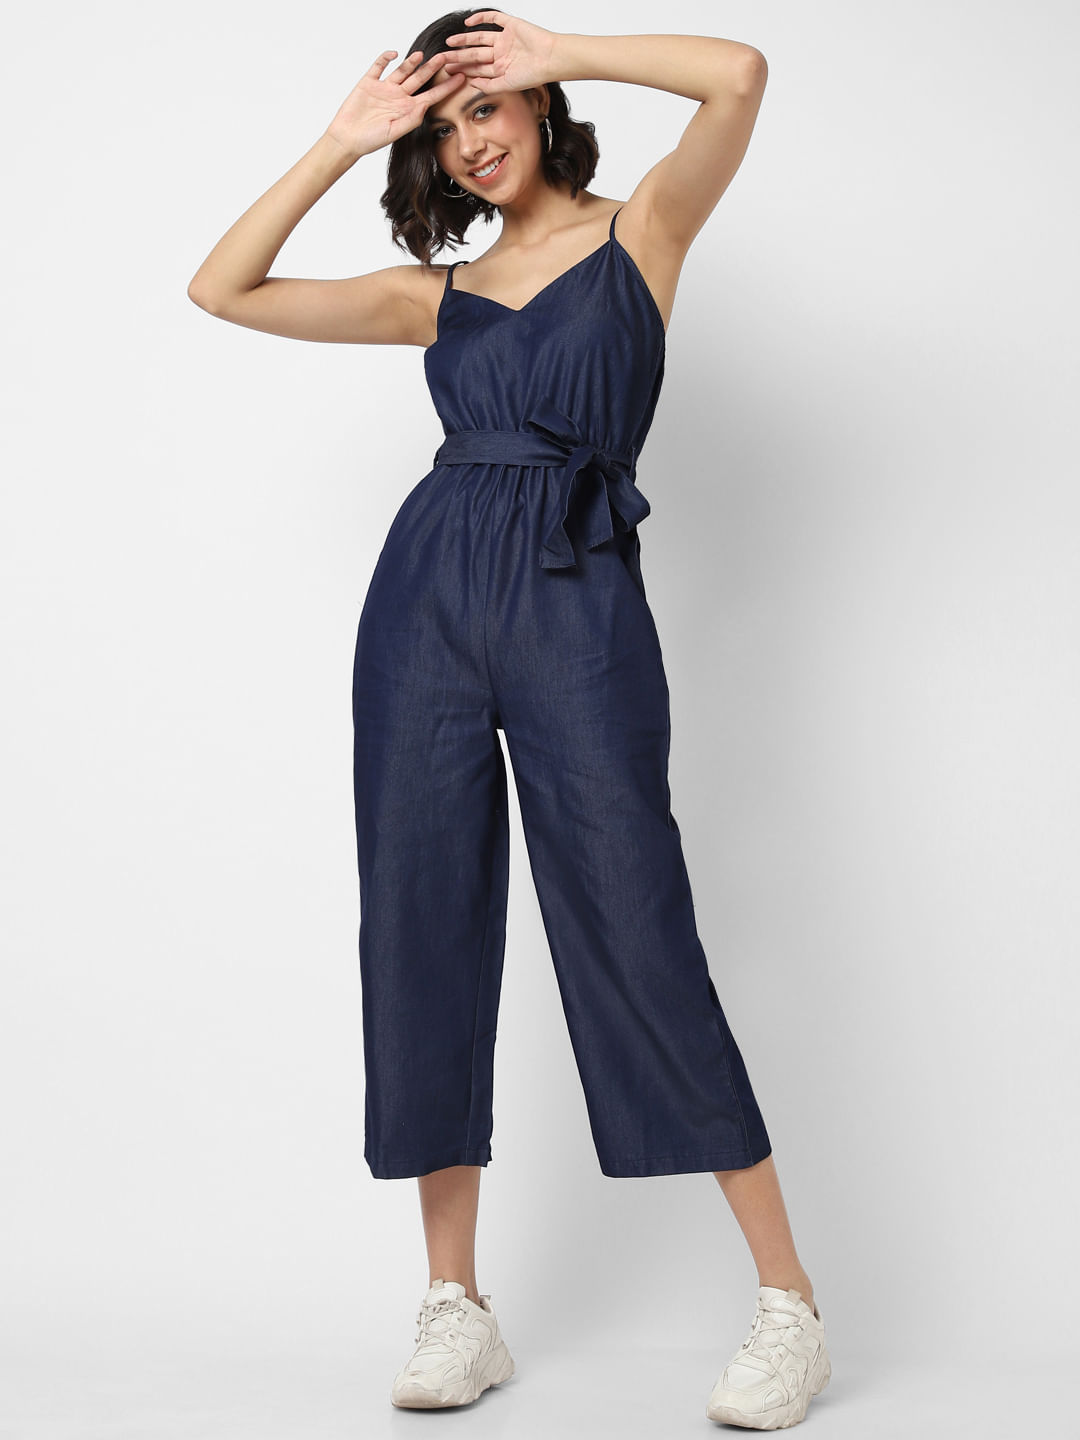 Kendall Jenner in Frame jumpsuit. The denim jumpsuit epitomises effortless  chic; a one-pi… | Trending fashion outfits, Fashion clothes women, Trendy  fashion outfits